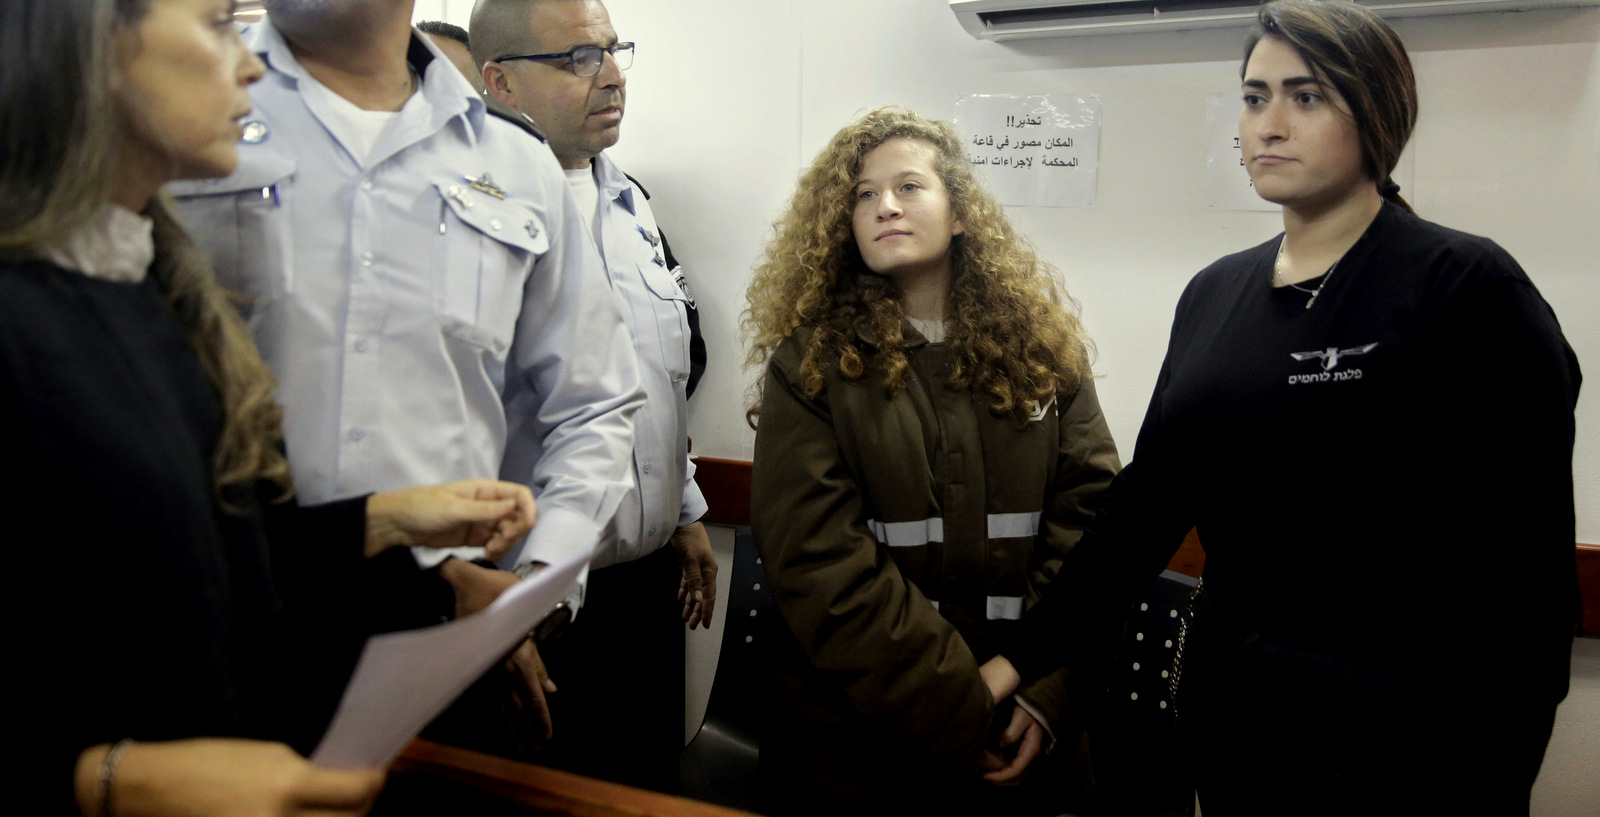 Ahed Tamimi is brought to a courtroom inside the Ofer military prison near occupied Jerusalem, Jan. 15, 2018. (AP/Mahmoud Illean)